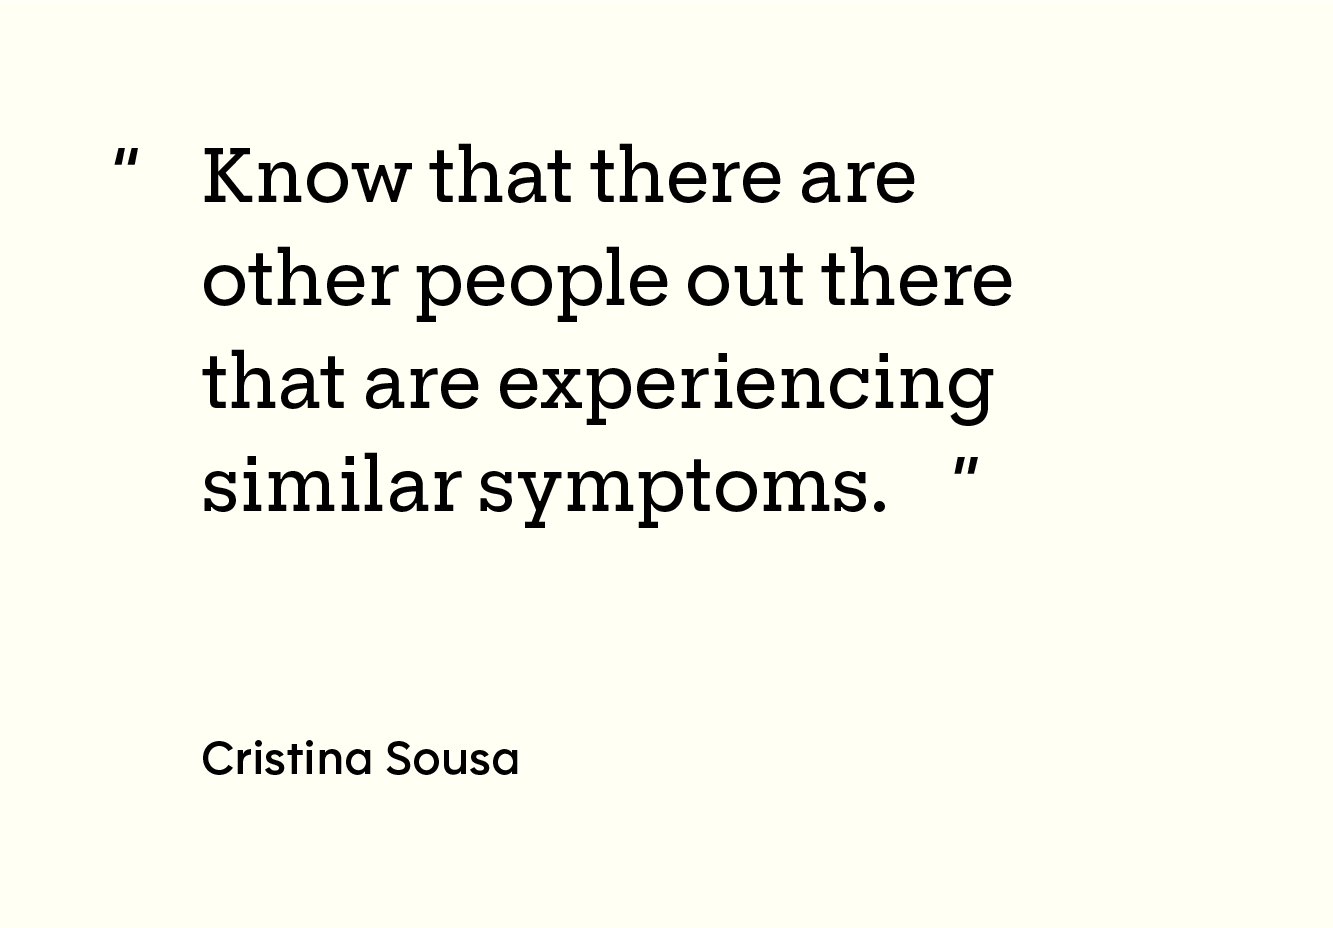 Image of the quote “Know that there are other people out there that are experiencing similar symptoms.”